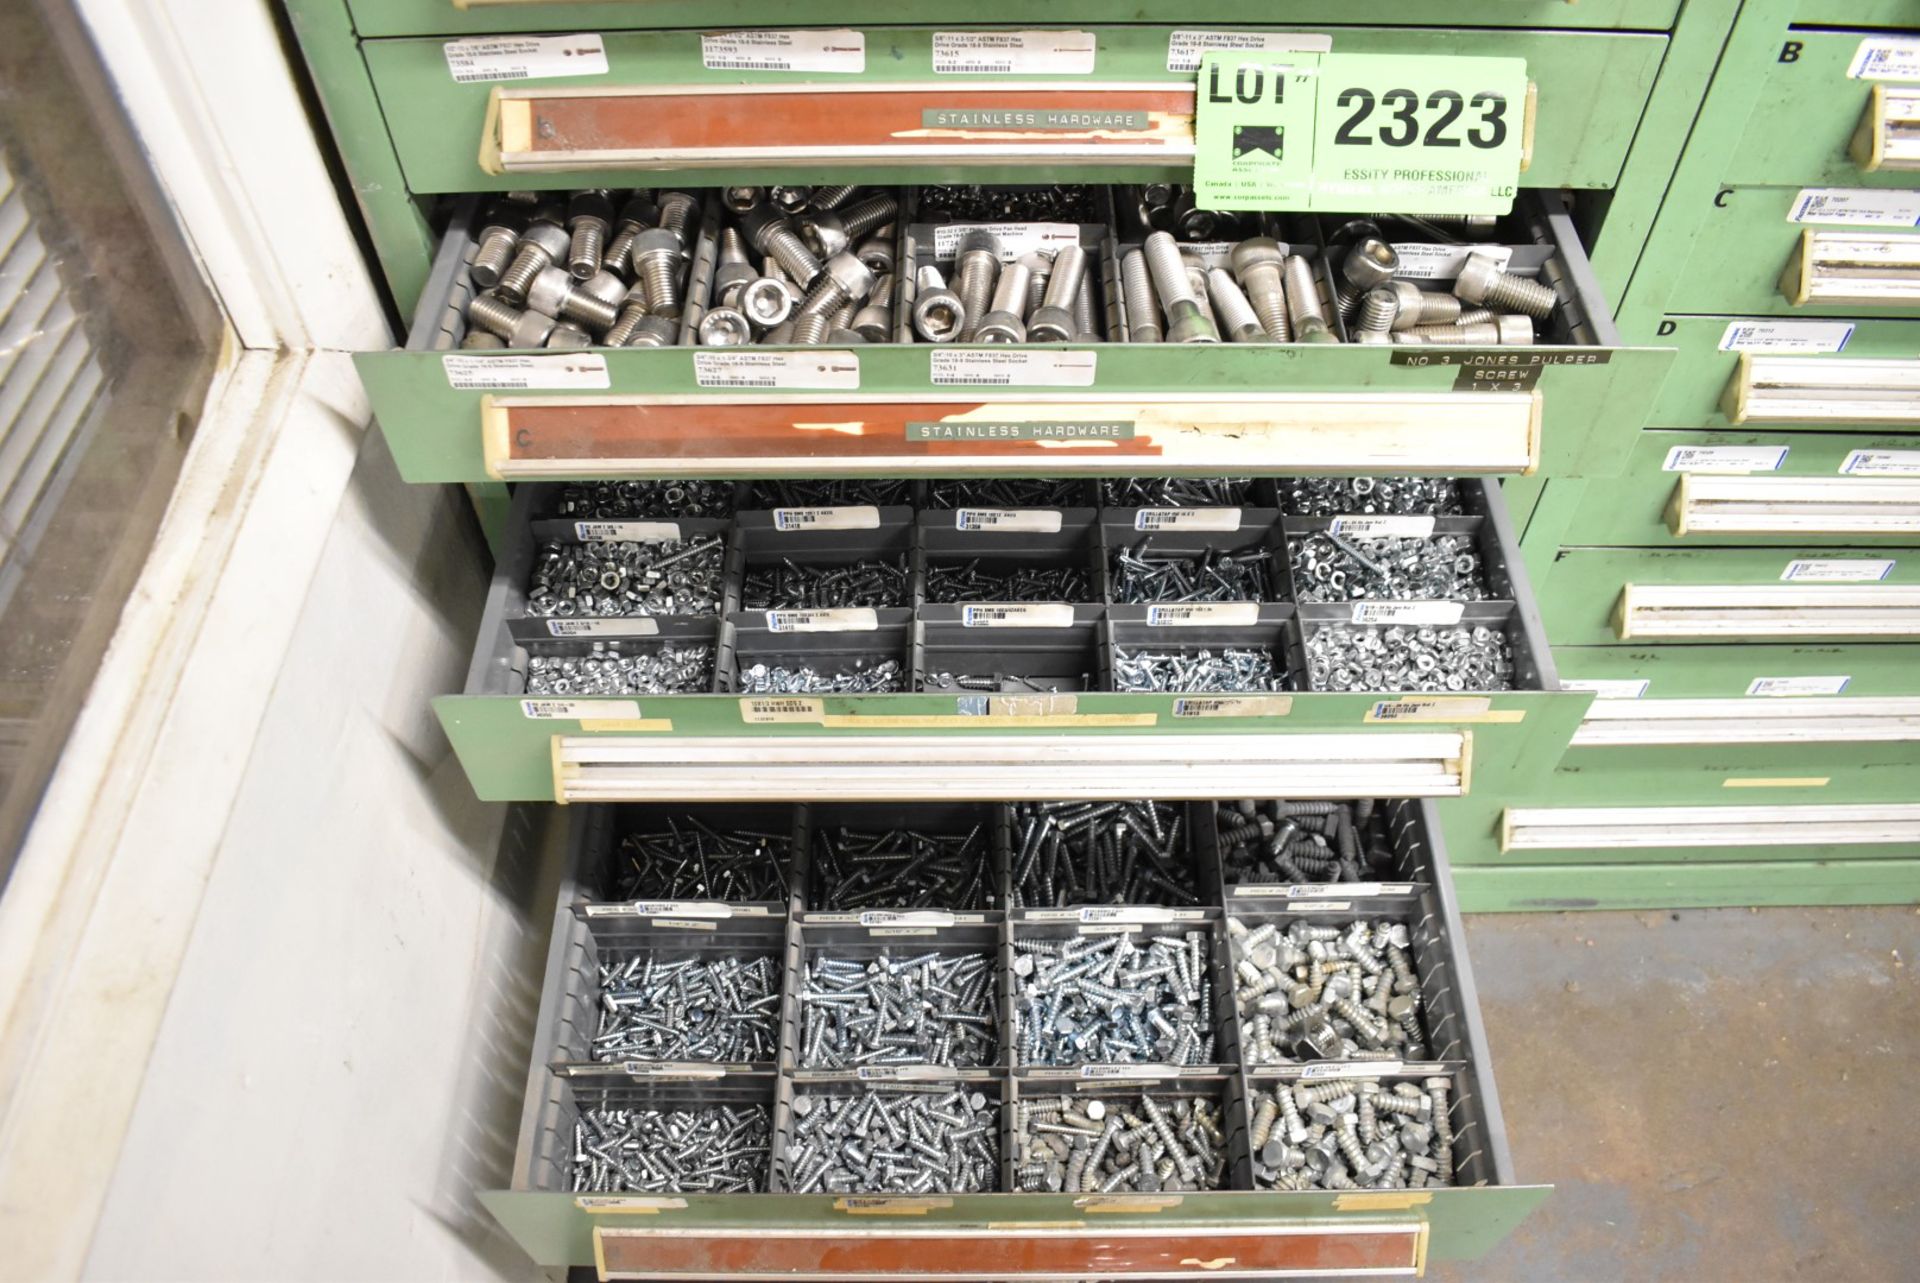 LOT/ CONTENTS OF CABINET - INCLUDING STAINLESS STEEL HARDWARE, HARDWARE, SET SCREWS (TOOL CABINET